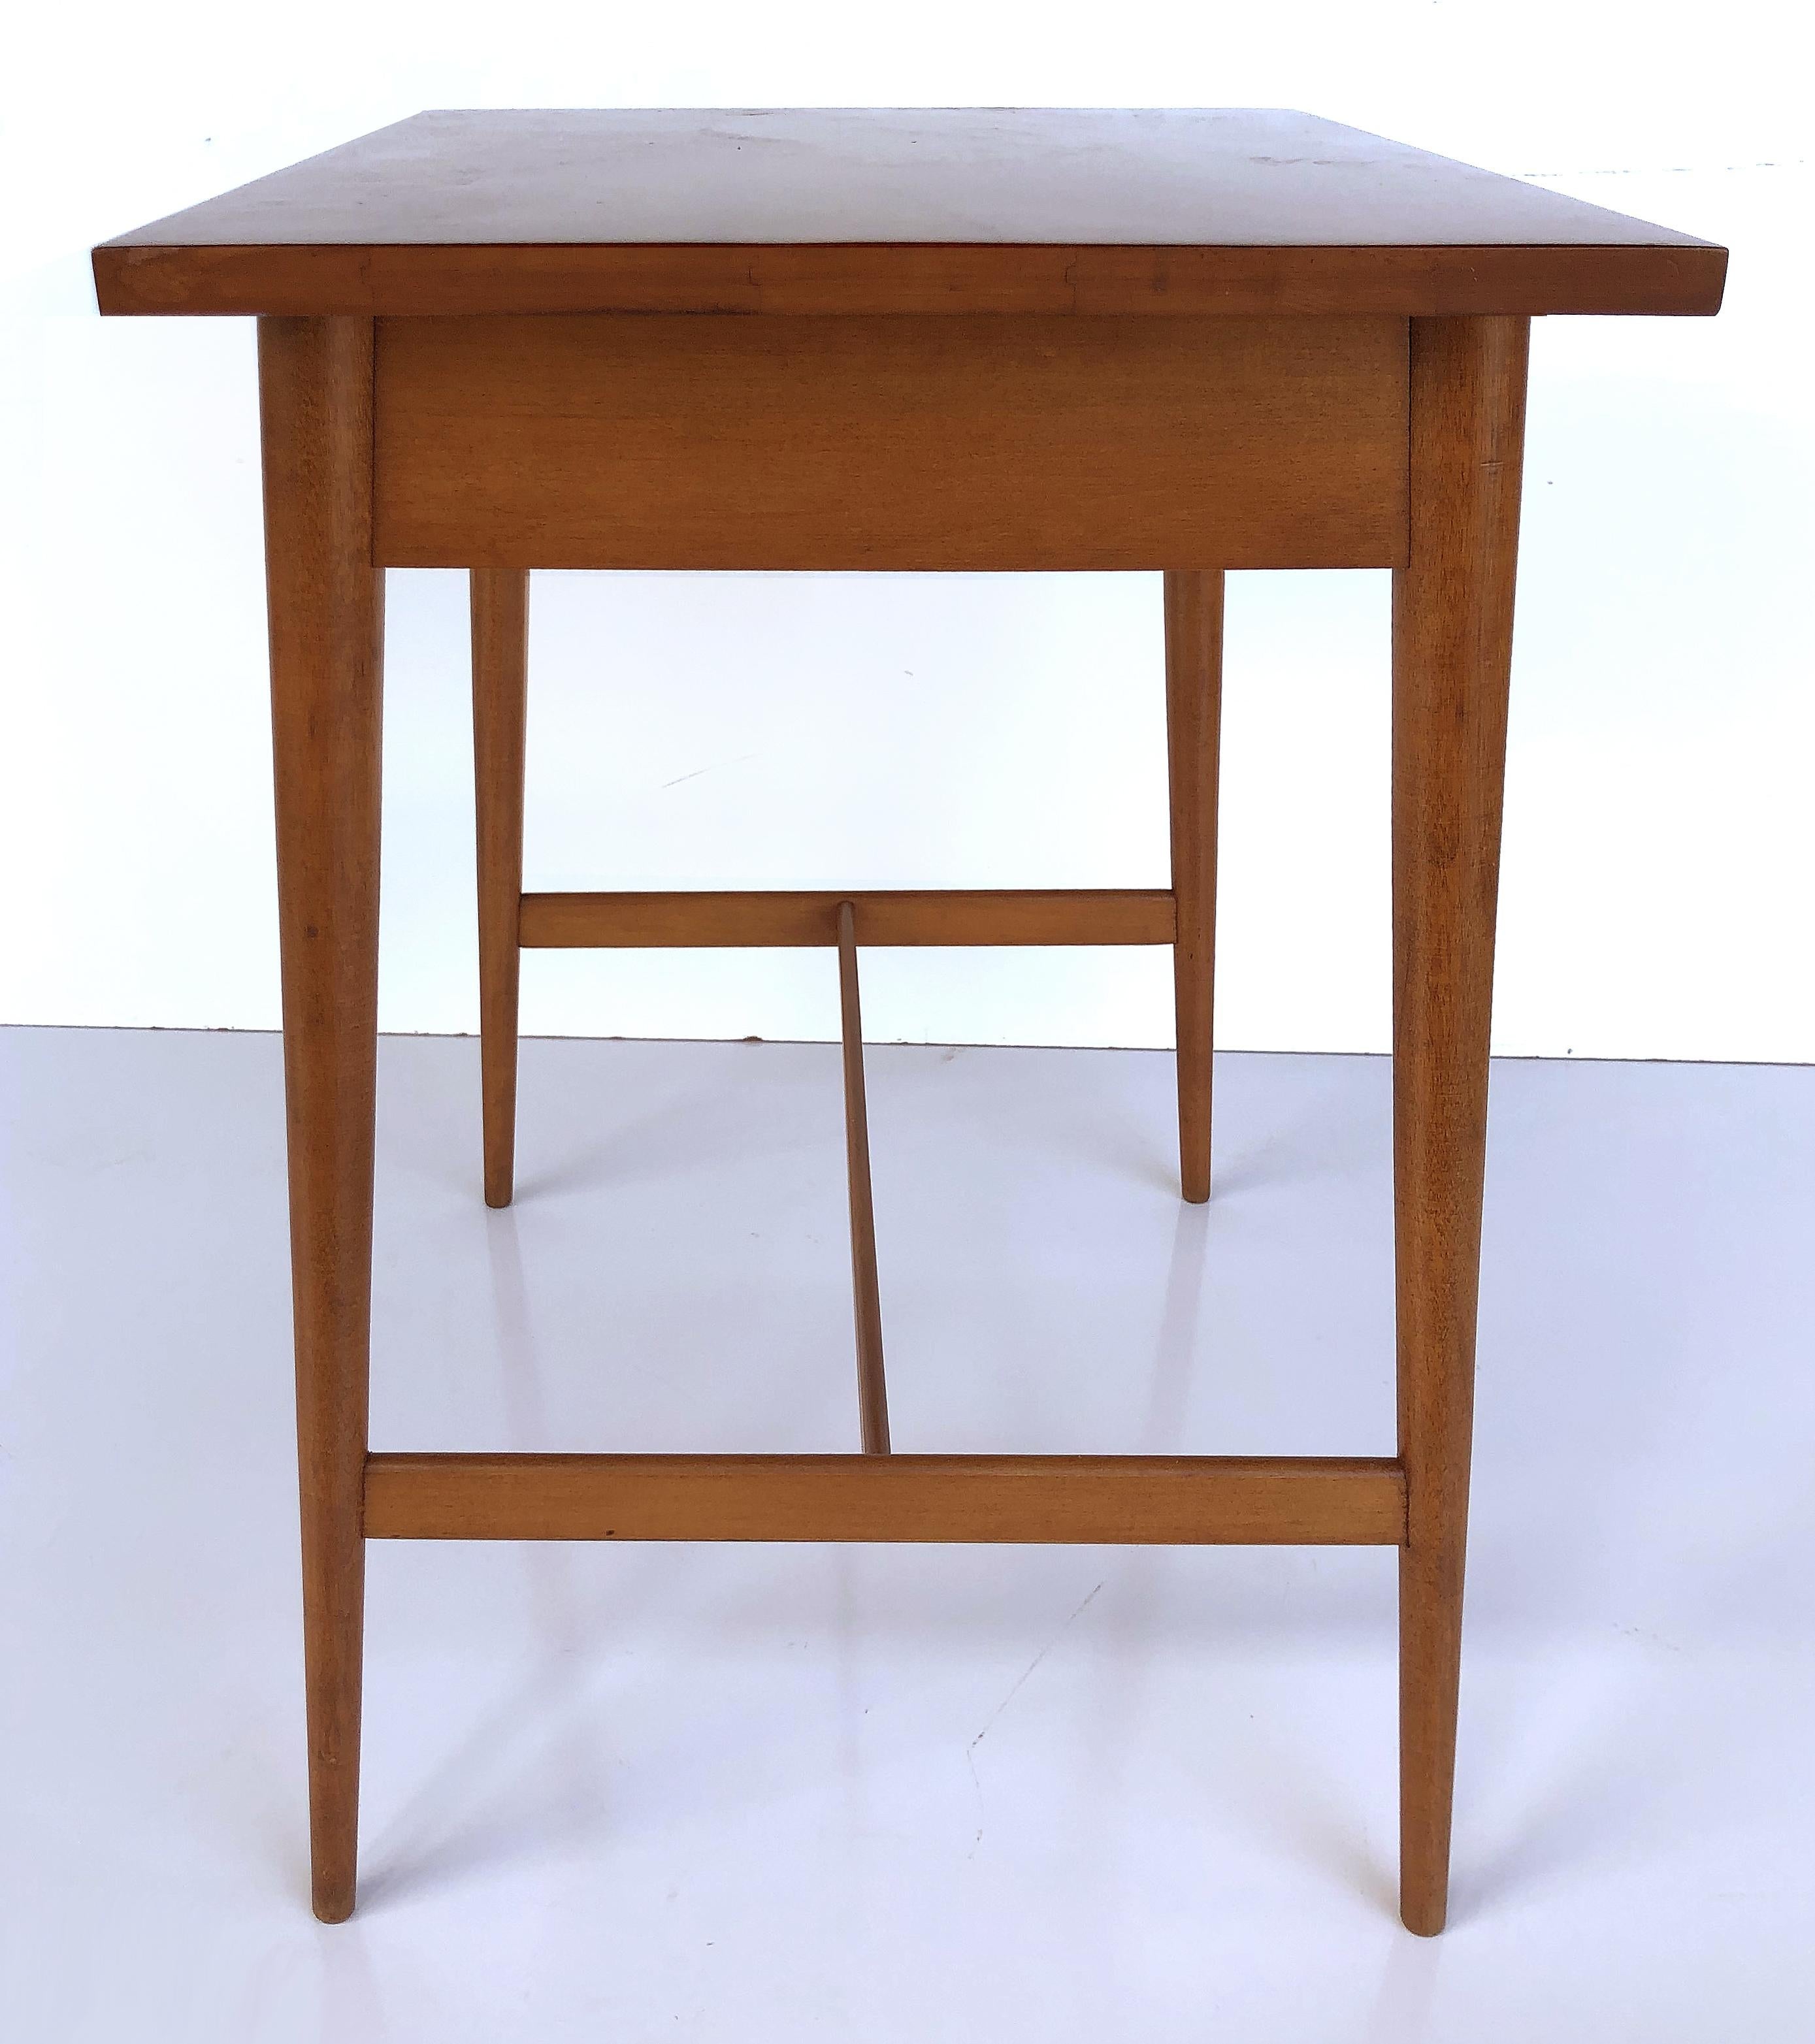 Midcentury Paul McCobb Planner Group nightstand, Model 1586

Offered for sale is a Mid-Century Modern Paul McCobb nightstand for the Planner Group. The nightstand is model #1586 and has recently been refinished in a blonde hue with the iconic